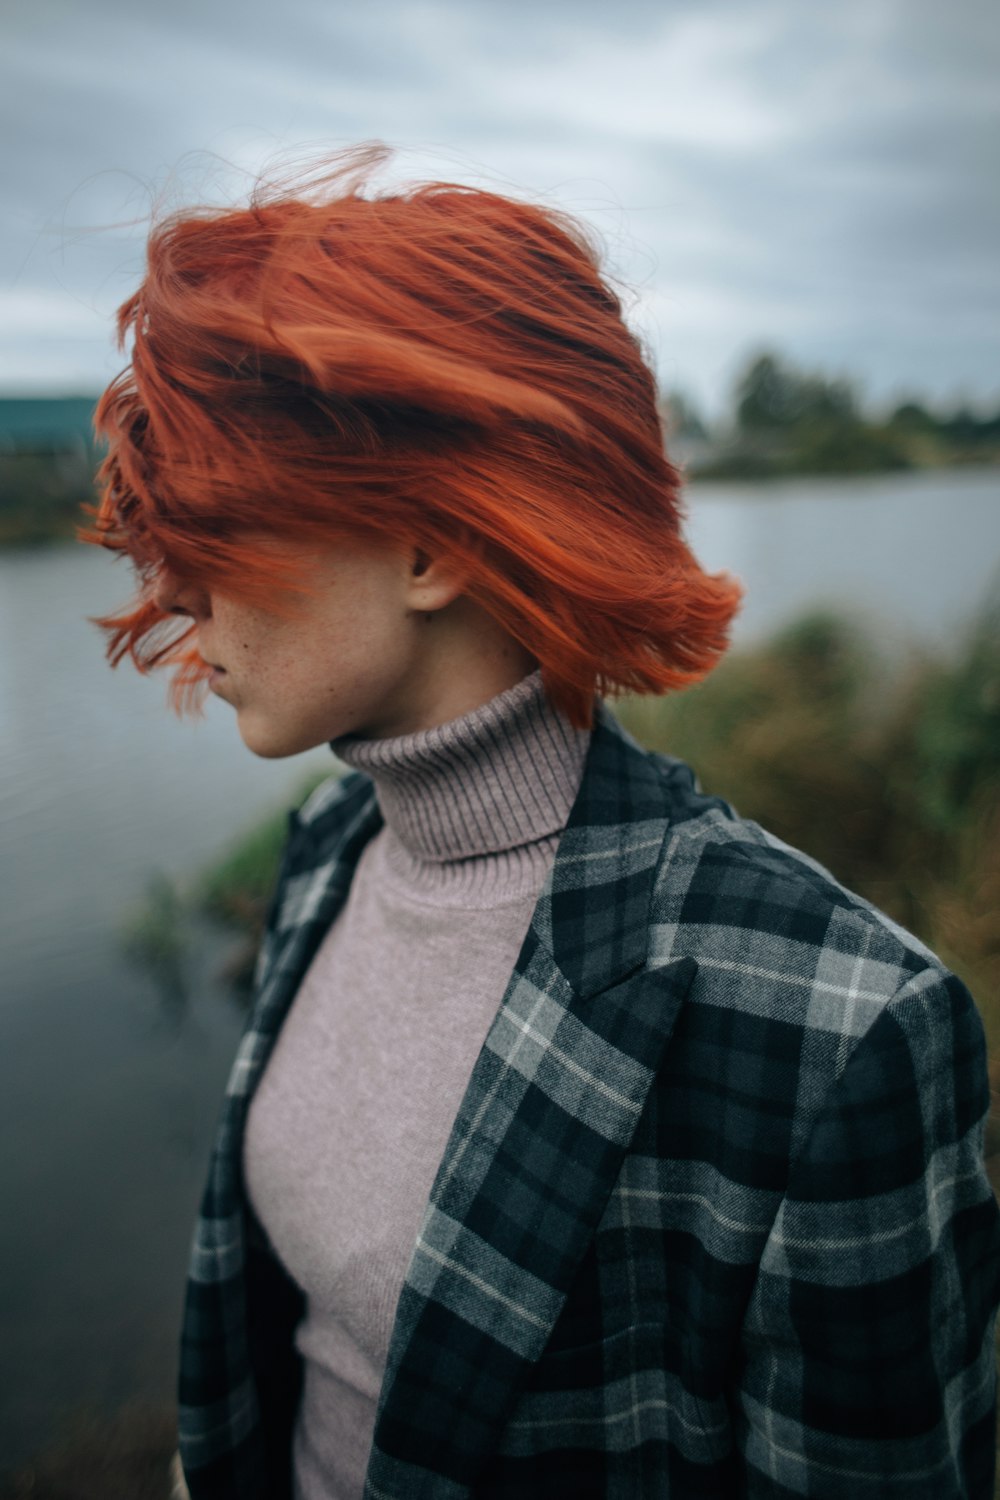 woman in black and white plaid shirt with red hair photo – Free Fashion  Image on Unsplash